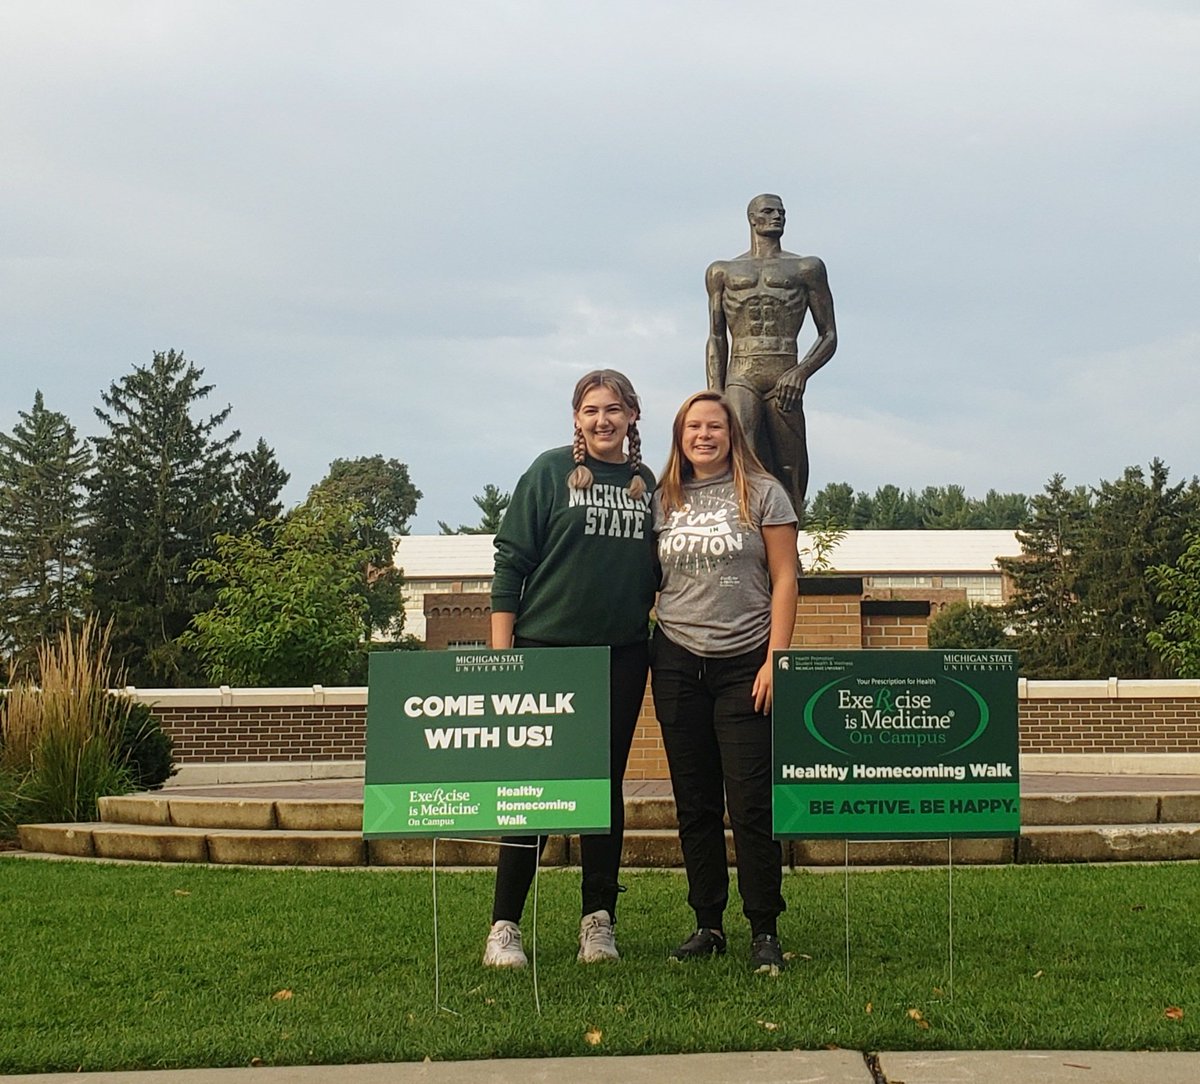 Were ready for you @michiganstateu ! Join us for the EIM-OC Healthy Homecoming Walk anytime today between 8am-2pm, dem hall field! #HEALTHYCAMPUSWEEK2023 @HealthierCampus @SWIPEOUTHUNGER @columbia1938